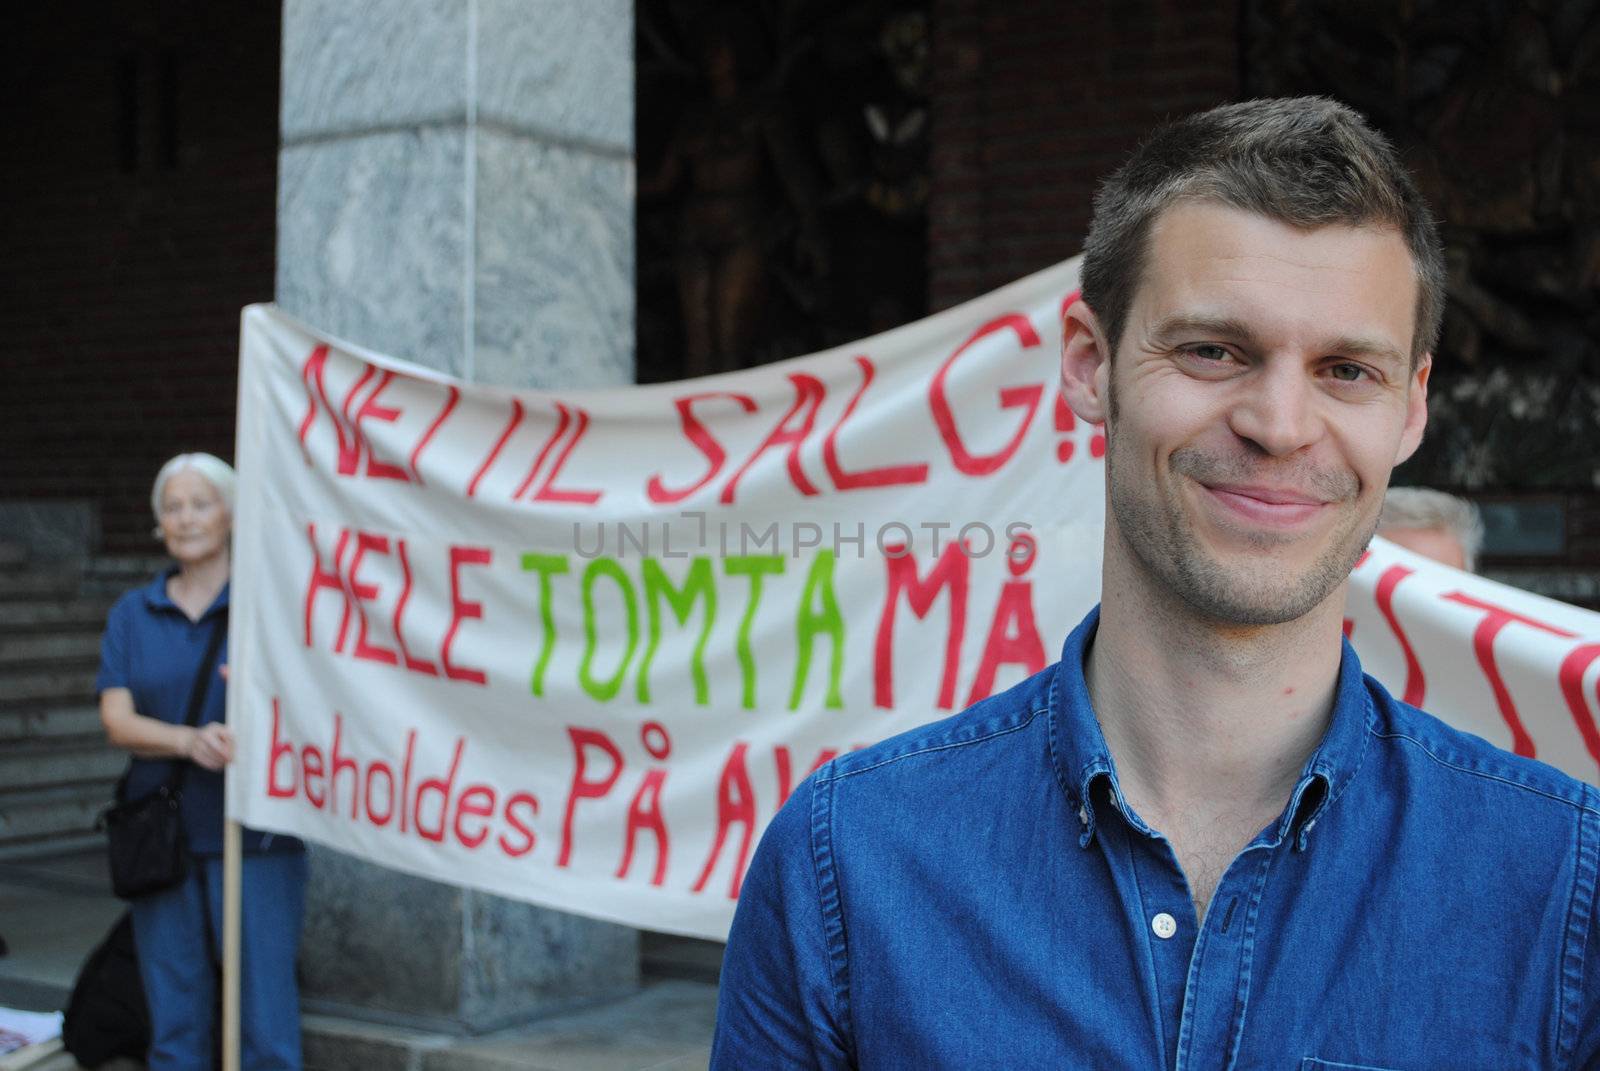 Bjørnar Moxnes, leader of the Red Party (Rødt) at a demonstration against the sale of Aker hospital in front of Oslo City Hall 23.05.2012.